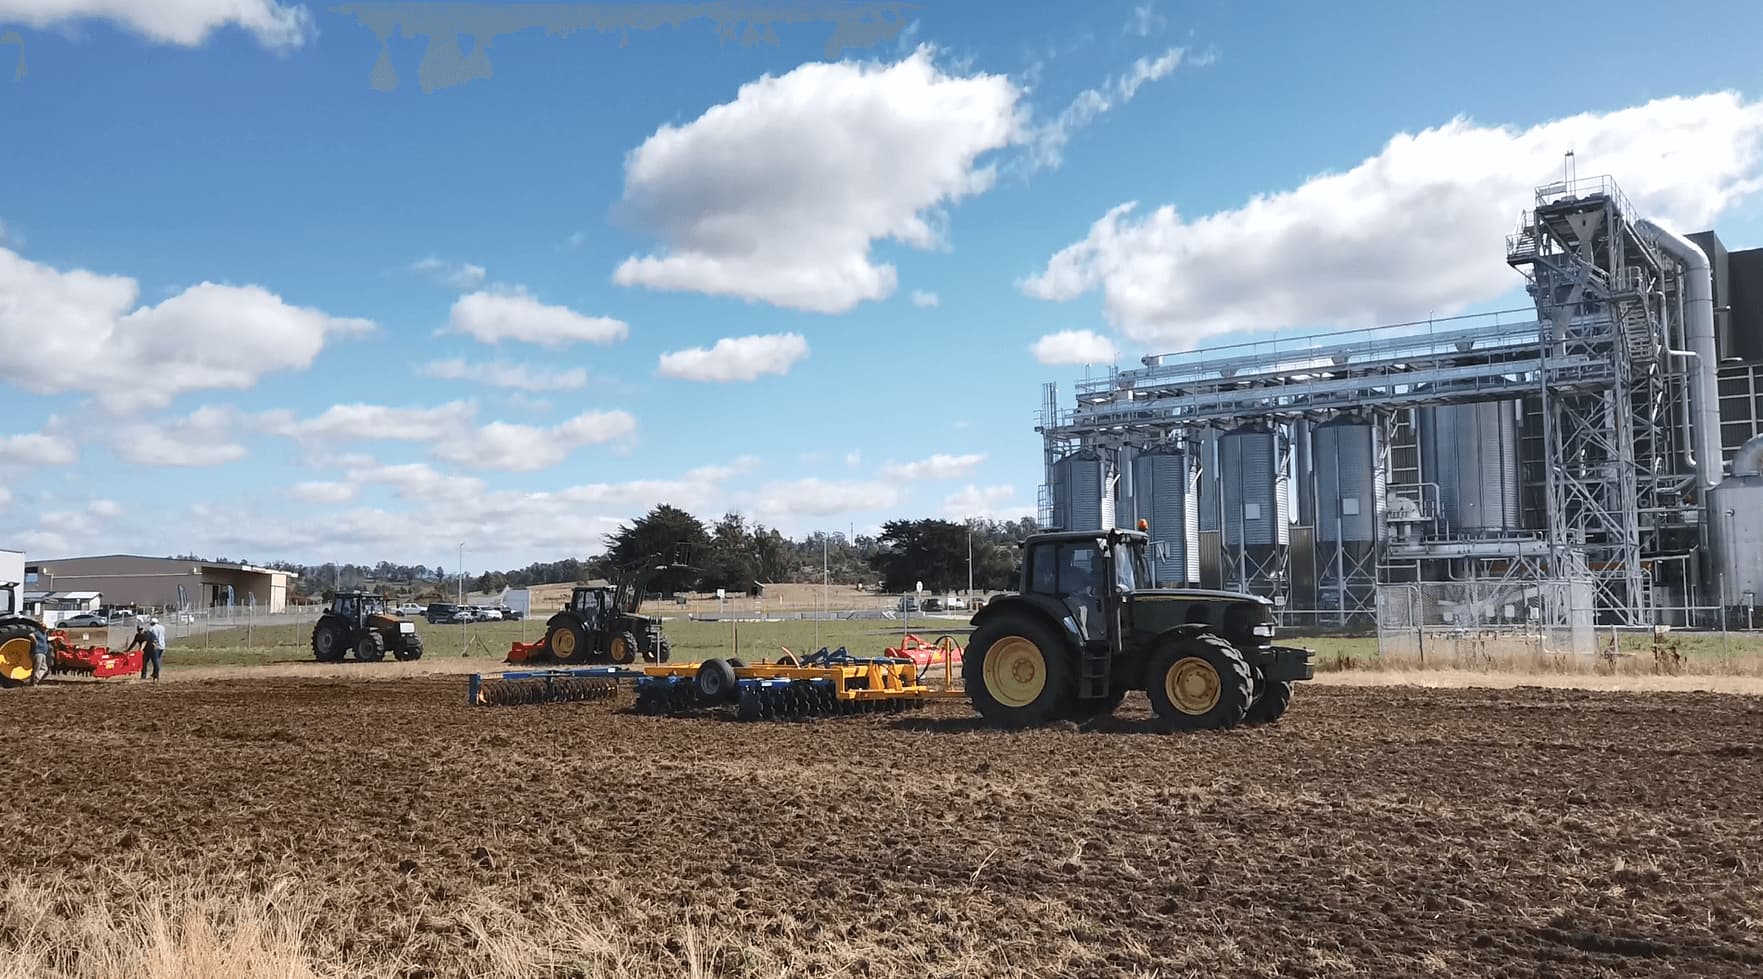 Delmade 850 Series Offset Disc behind John Deere Tractor - March 2020 Demo Day